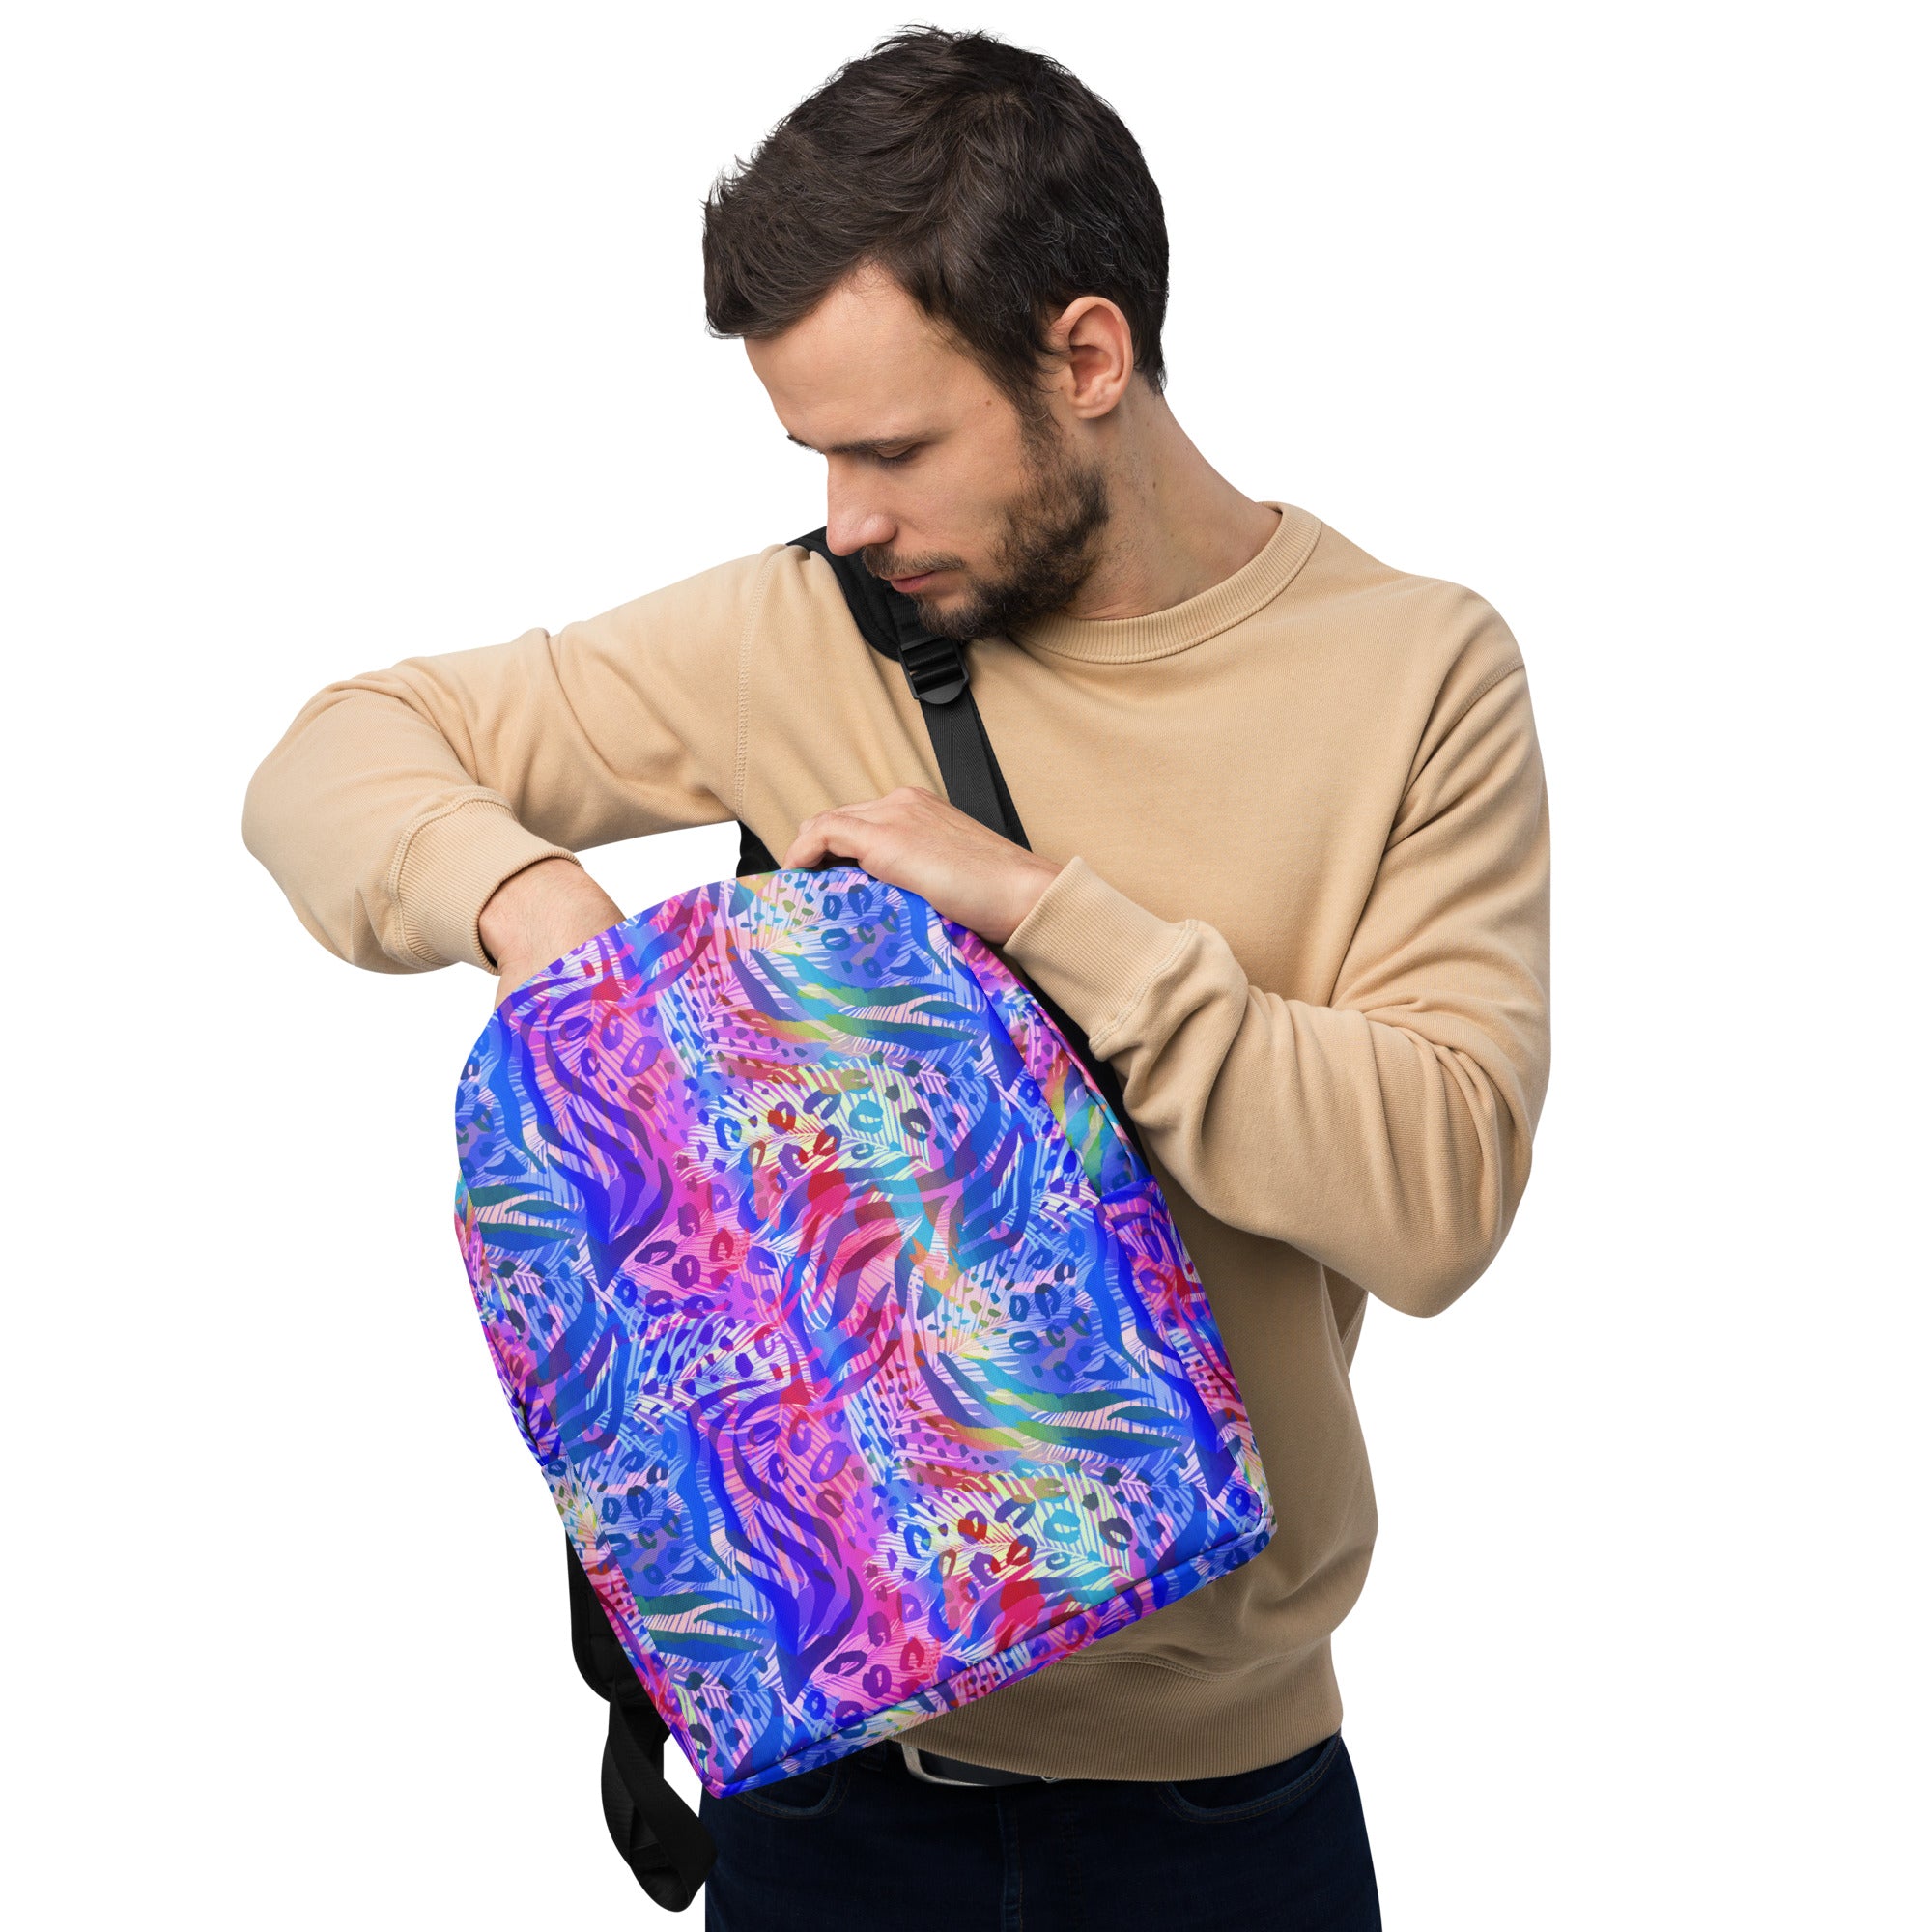 Minimalist Backpack- Animal print summer Blue,Pink with Yellow